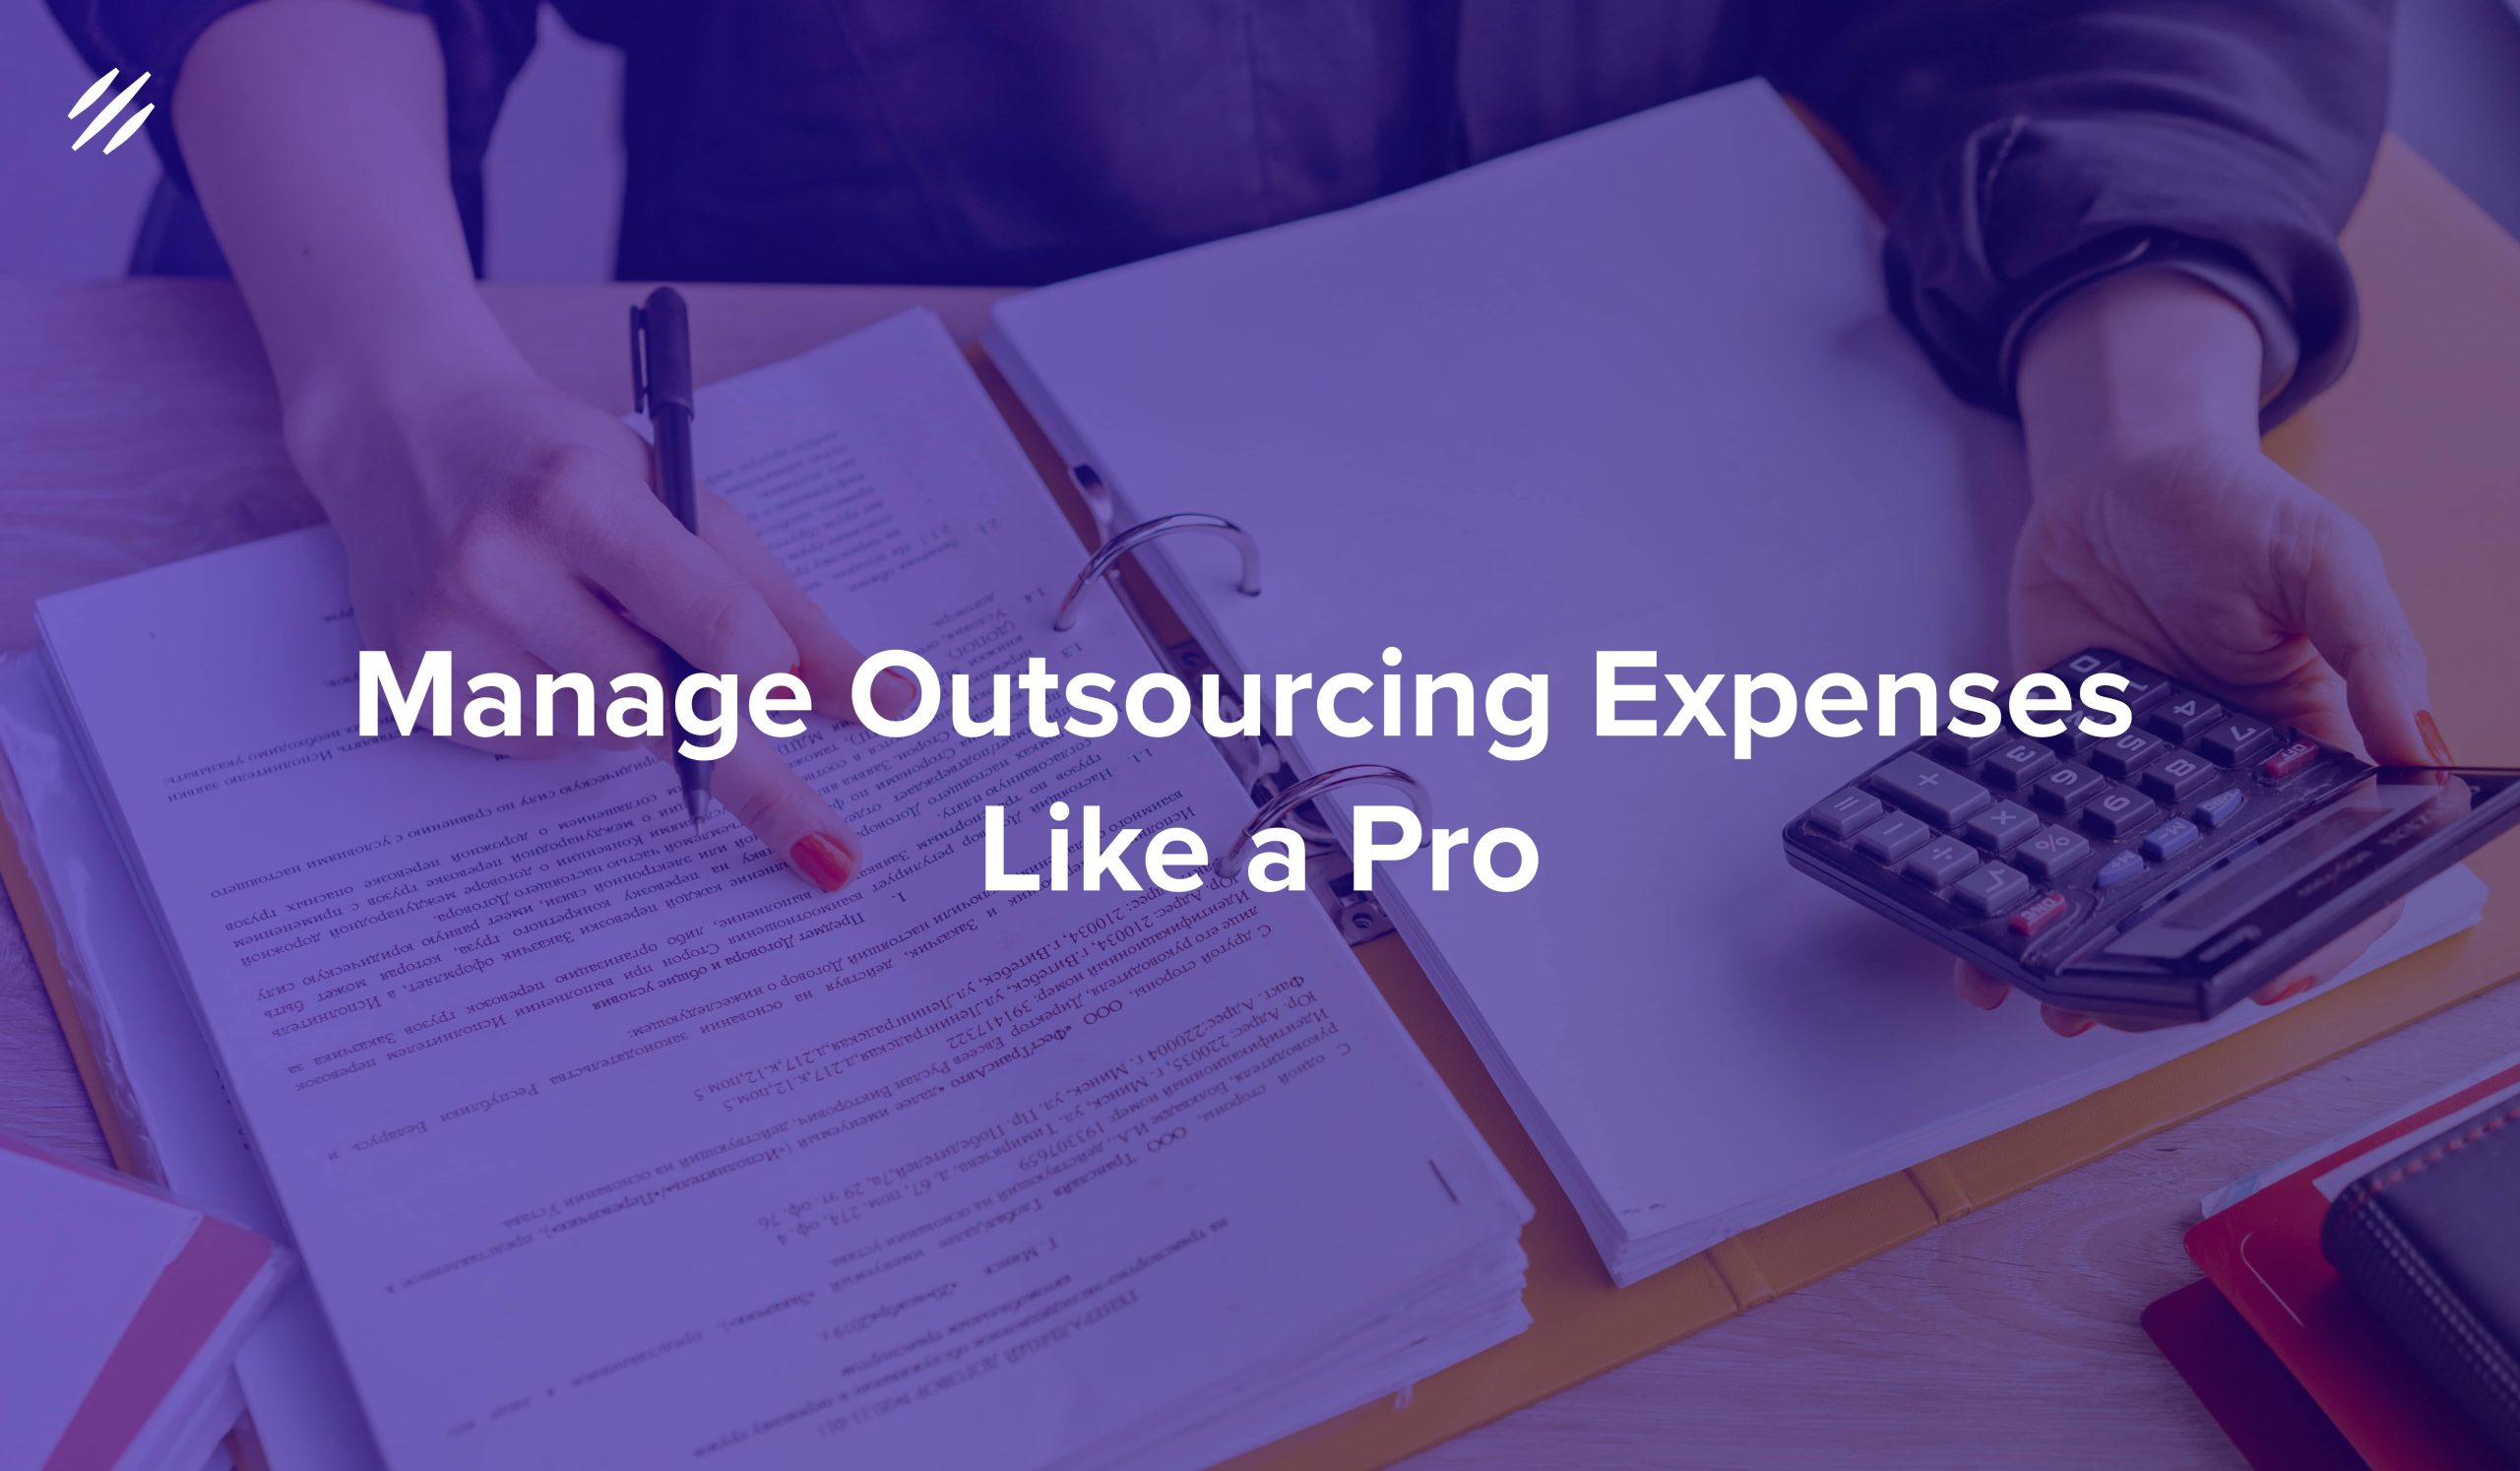 Ultimate Guide to Managing Outsourcing Expenses Like A Pro